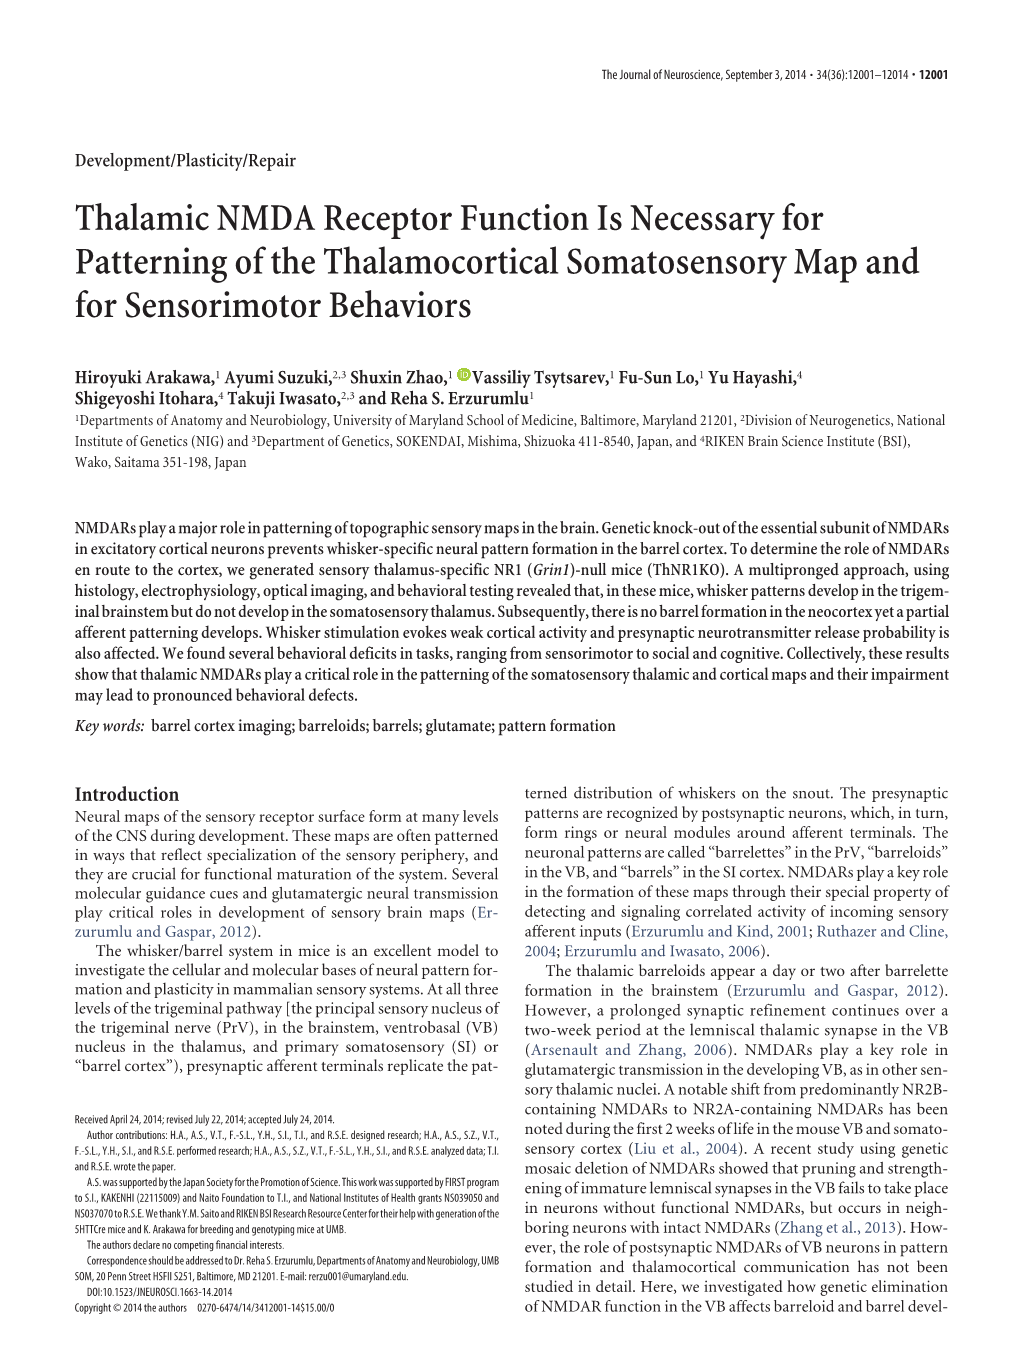 Thalamic NMDA Receptor Function Is Necessary for Patterning of the Thalamocortical Somatosensory Map and for Sensorimotor Behaviors